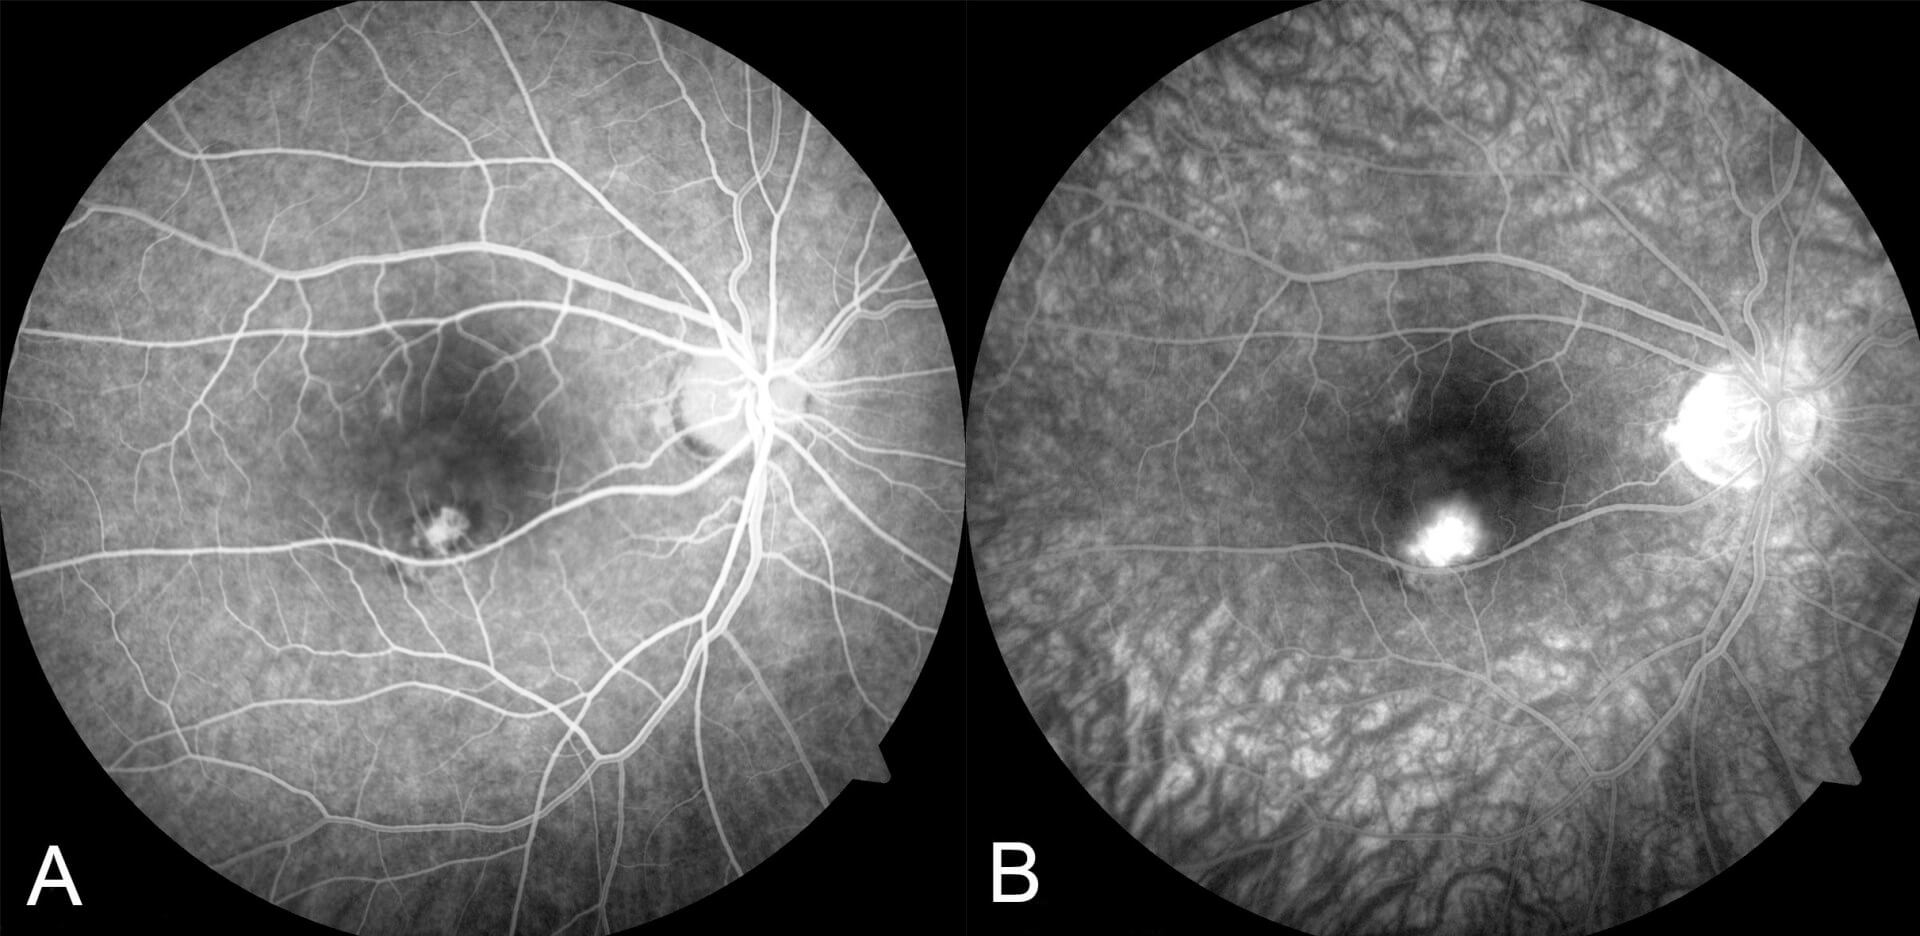 Scans through the region of the grey/green lesion demonstrates disturbance of the retinal pigment epithelial signal and a hyperreflective dome shaped lesion located beneath the retina with associated overlying retinal thickening. This represents the choroidal neovascular membrane. There is a trace amount of subretinal fluid.